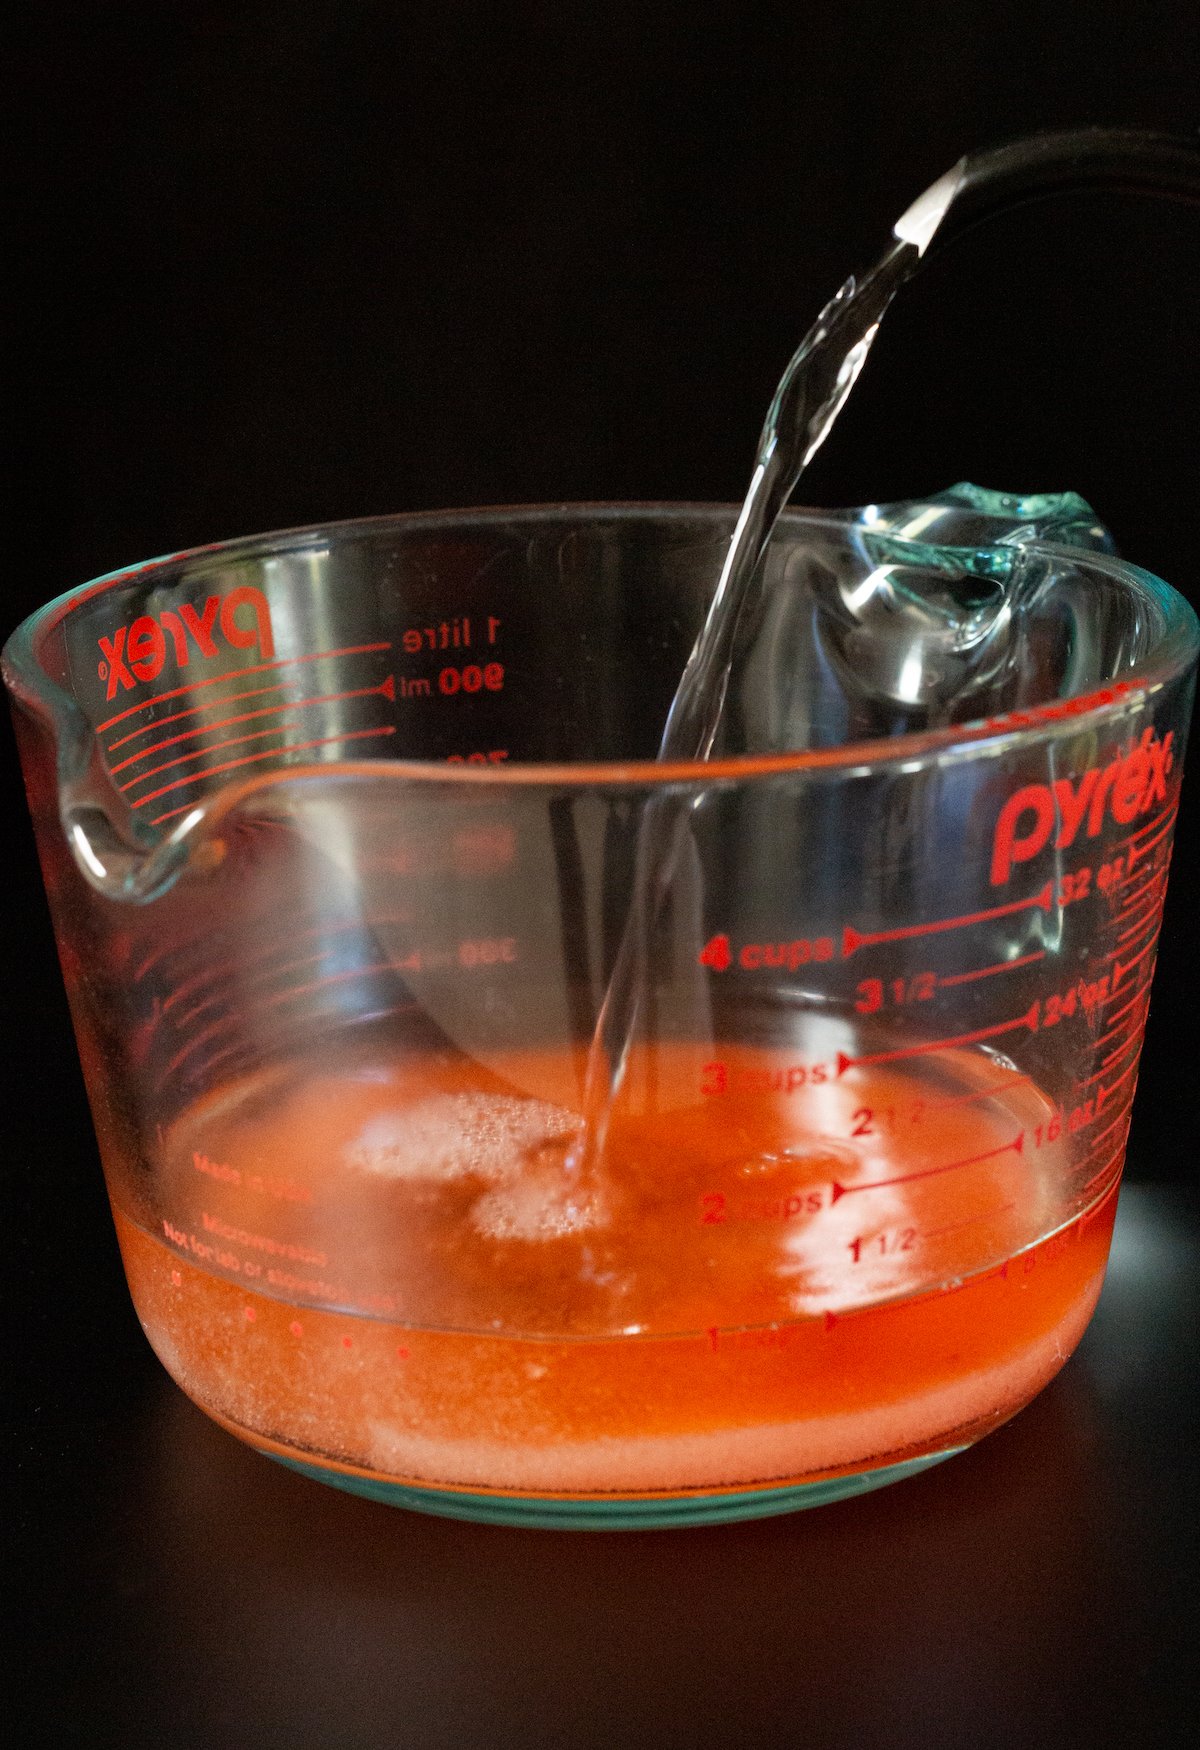 A large pyrex measuring cup with peach gelatin mix being filled with hot water from a kettle.